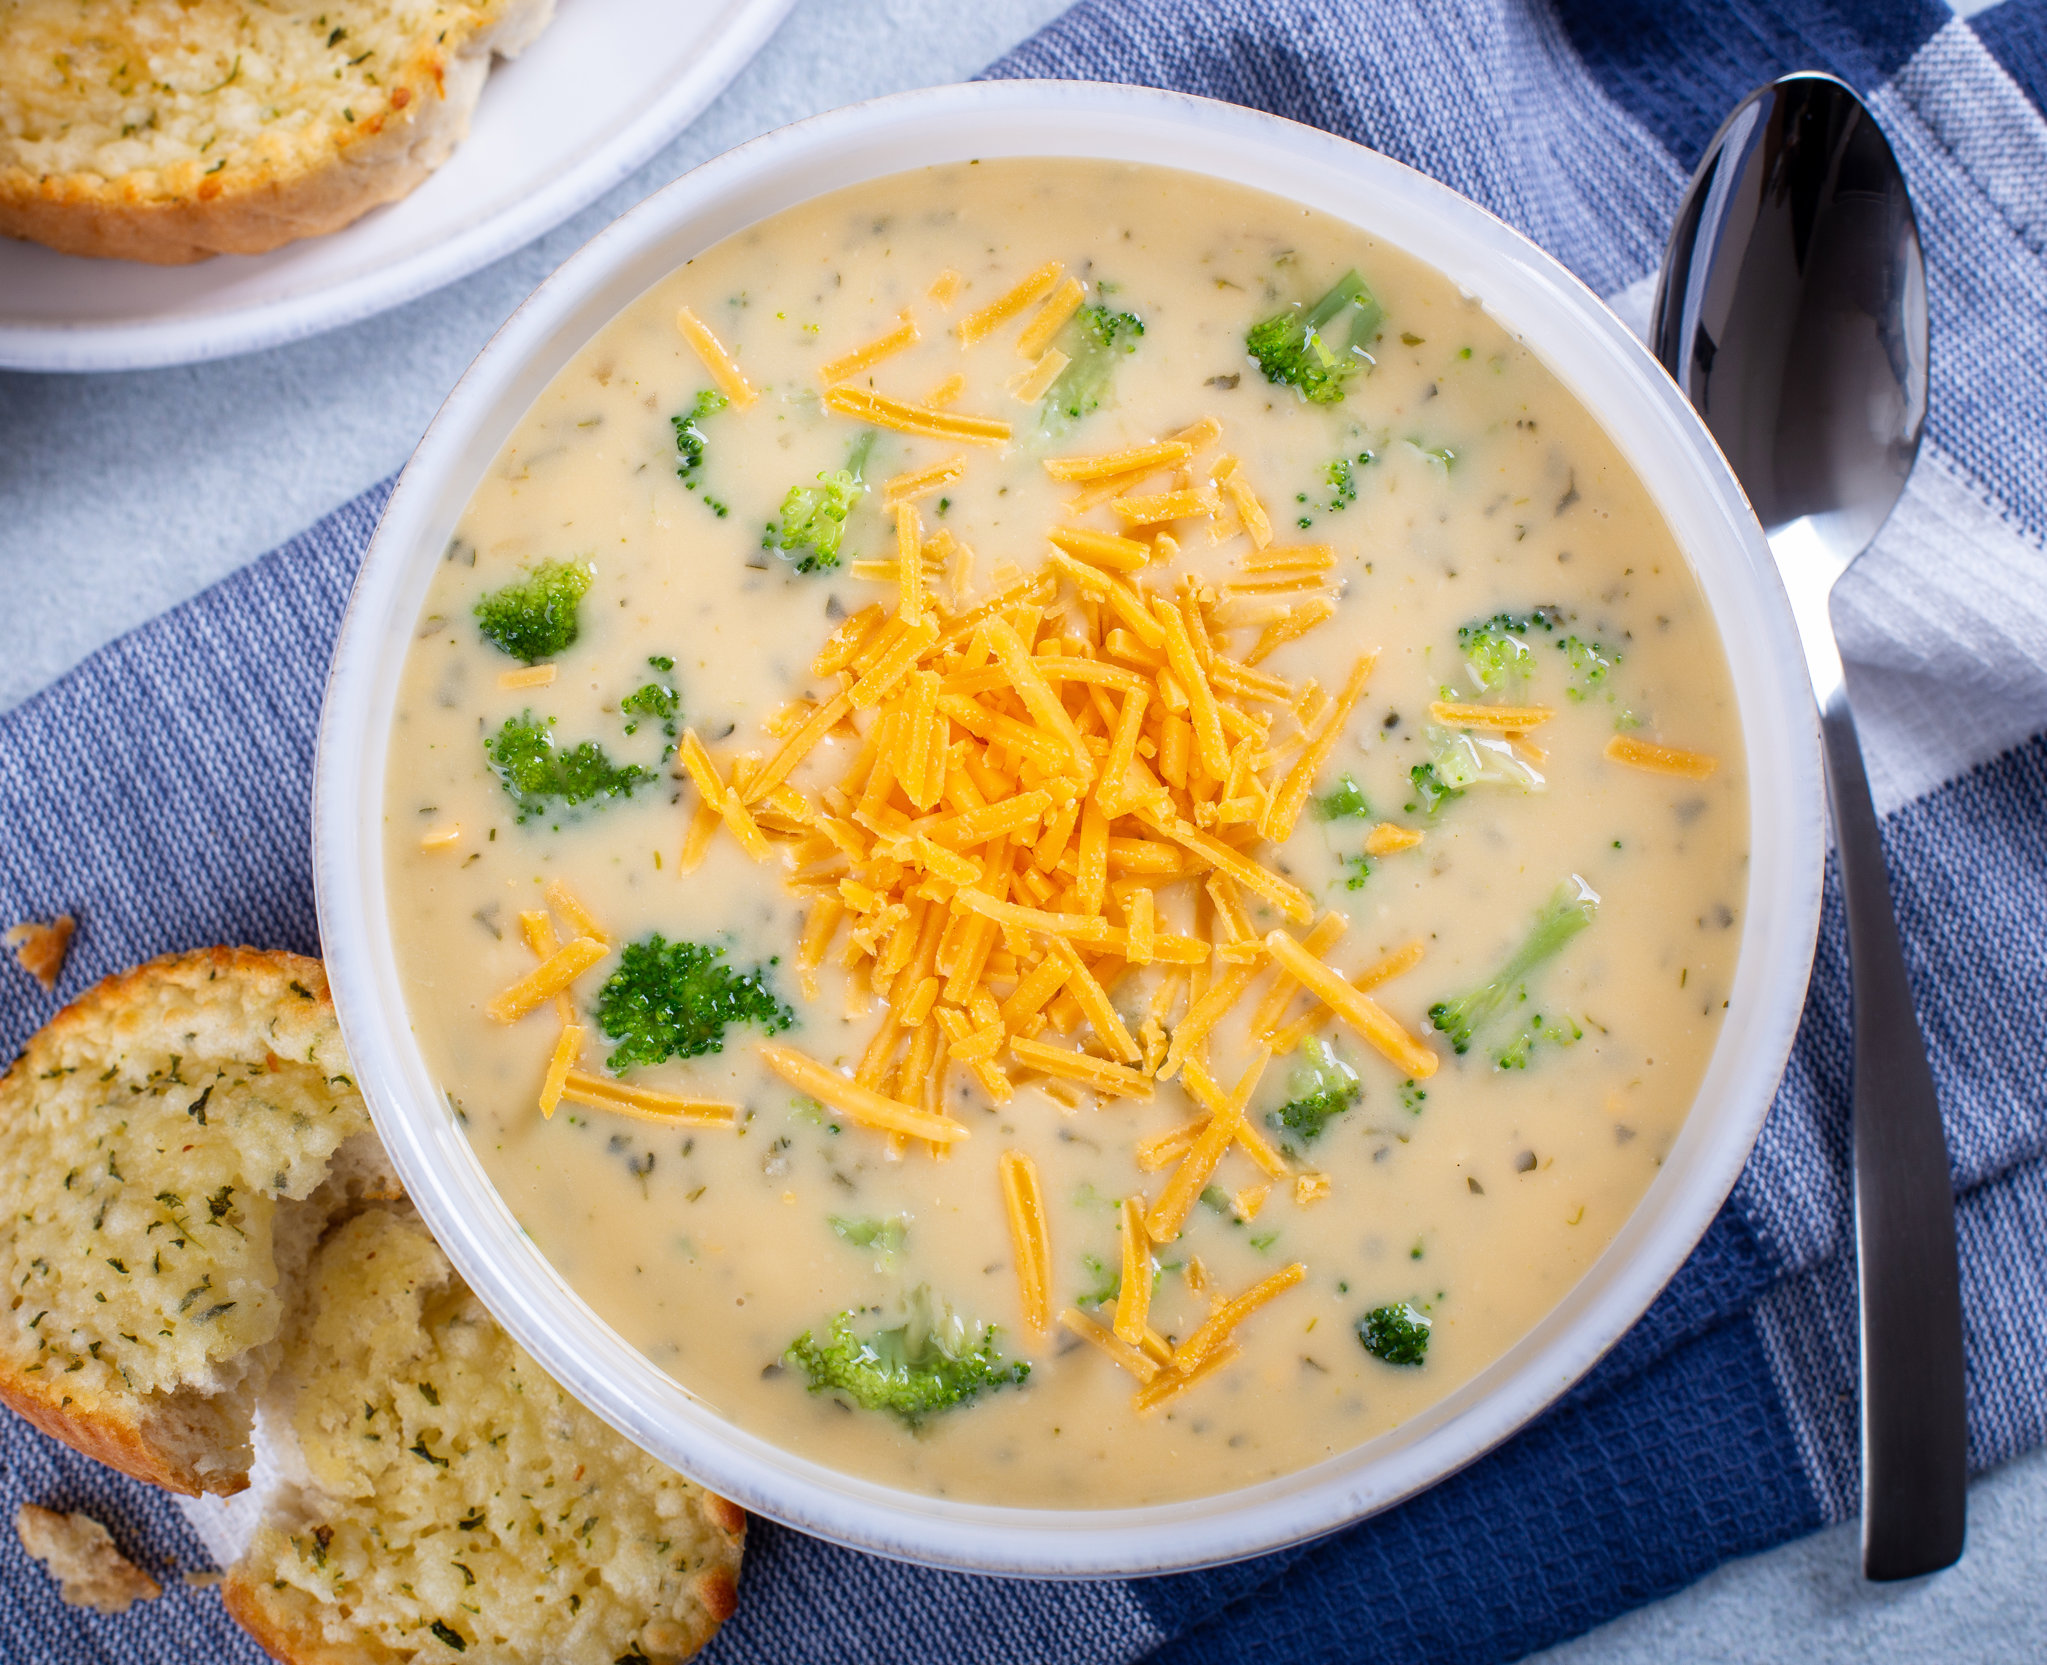 Picture of Broccoli Cheddar Soup